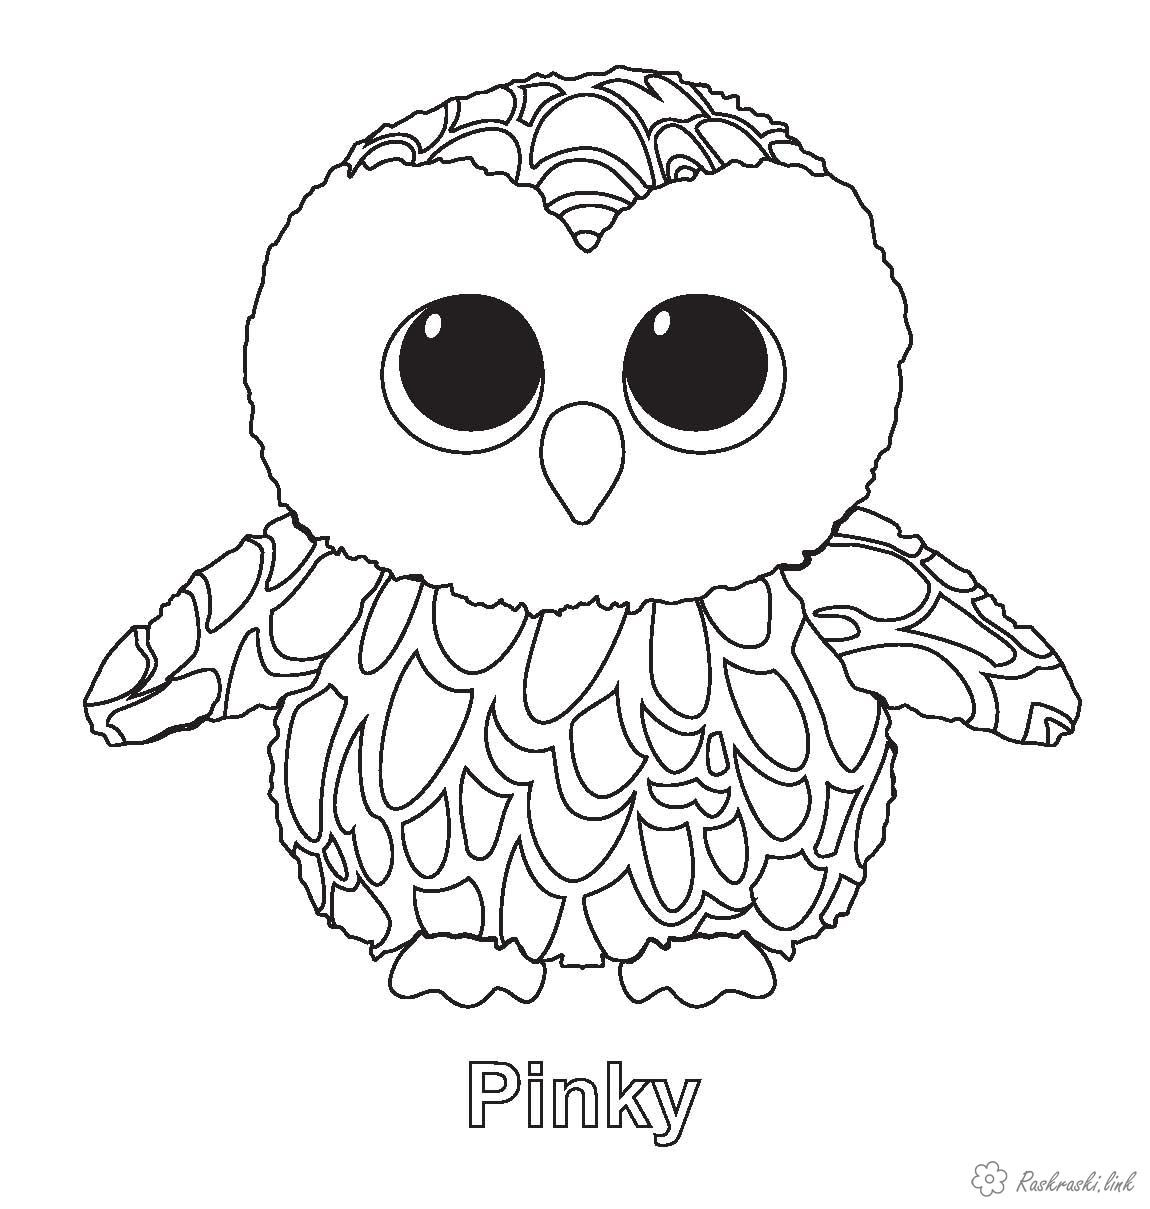 Beanie Boo Coloring Pages Only at GetDrawings Free download